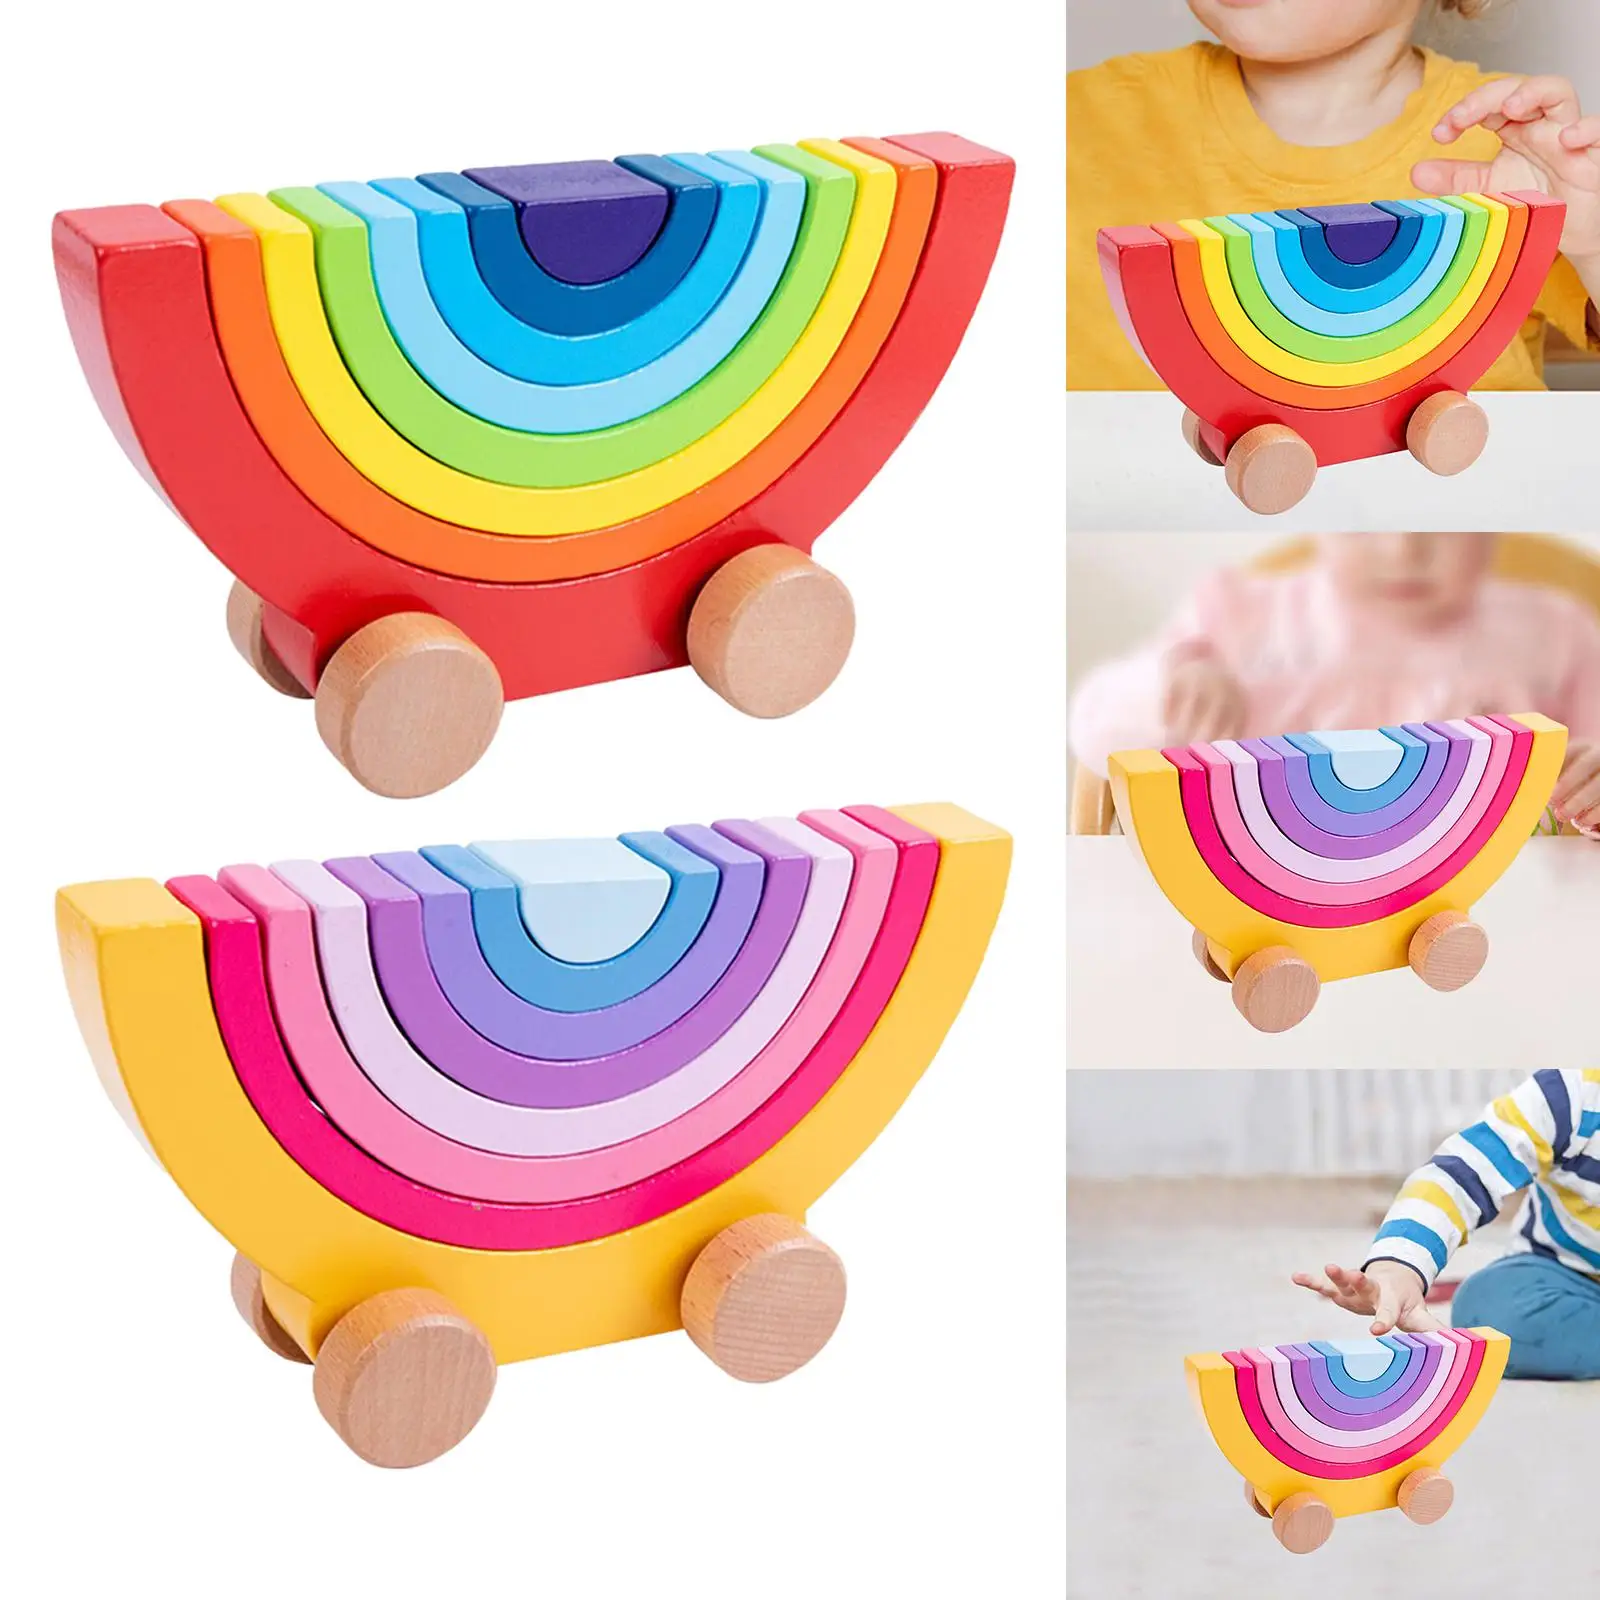 1 Set Wooden Building Blocks Car Toy Stacking Ornament Puzzle Early Educational Gift Creative Colorful Arch for Game Kids Baby